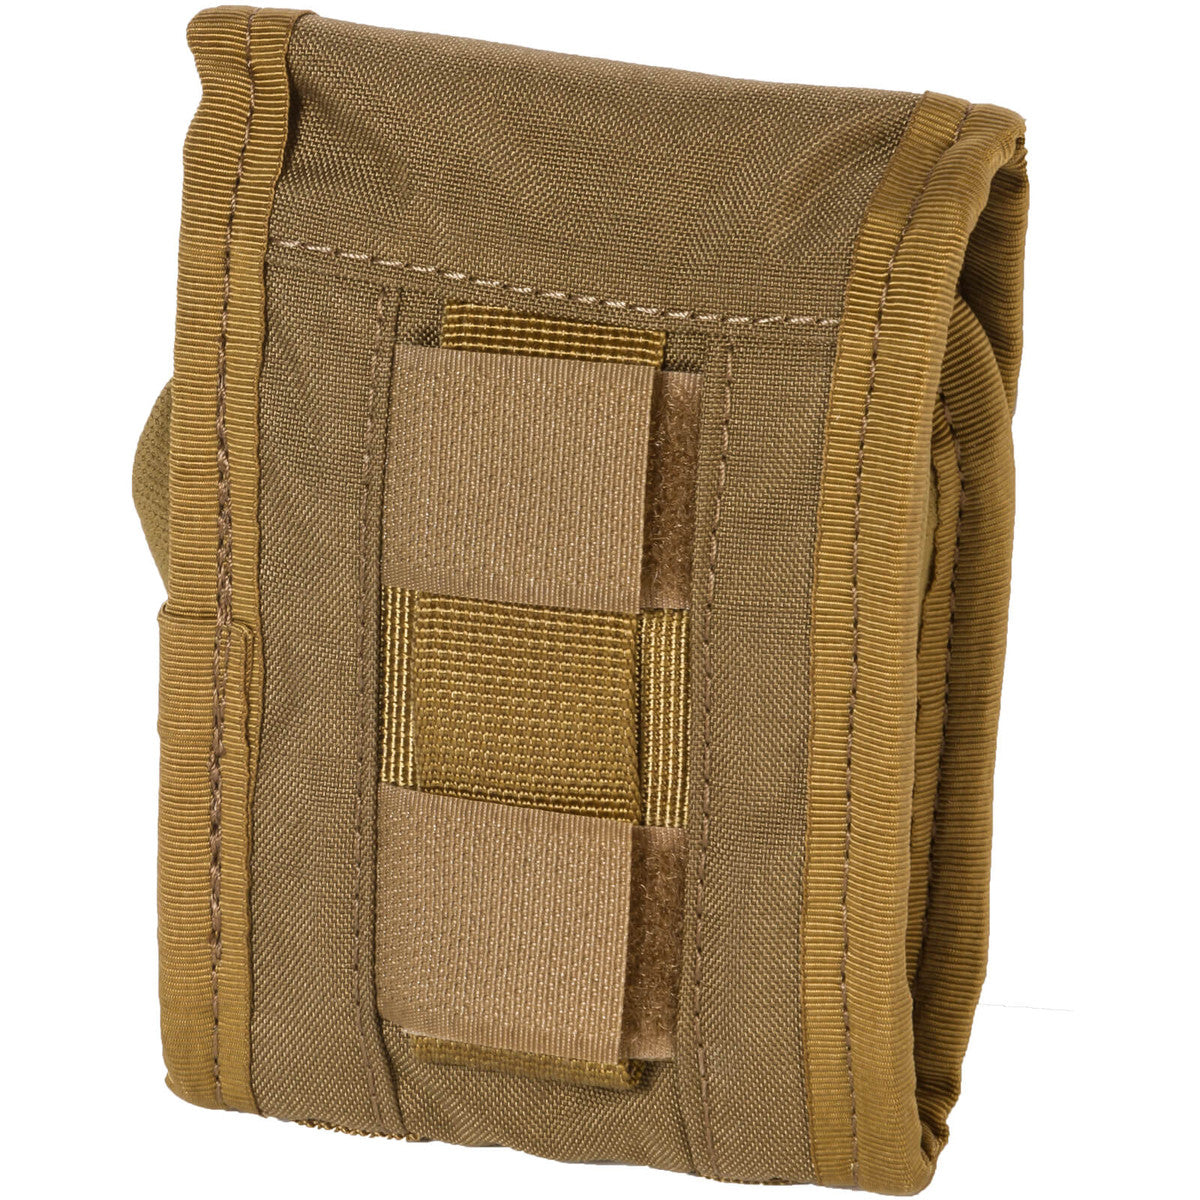 Mystery Ranch Range Finder Holster - Coyote -  - Mansfield Hunting & Fishing - Products to prepare for Corona Virus